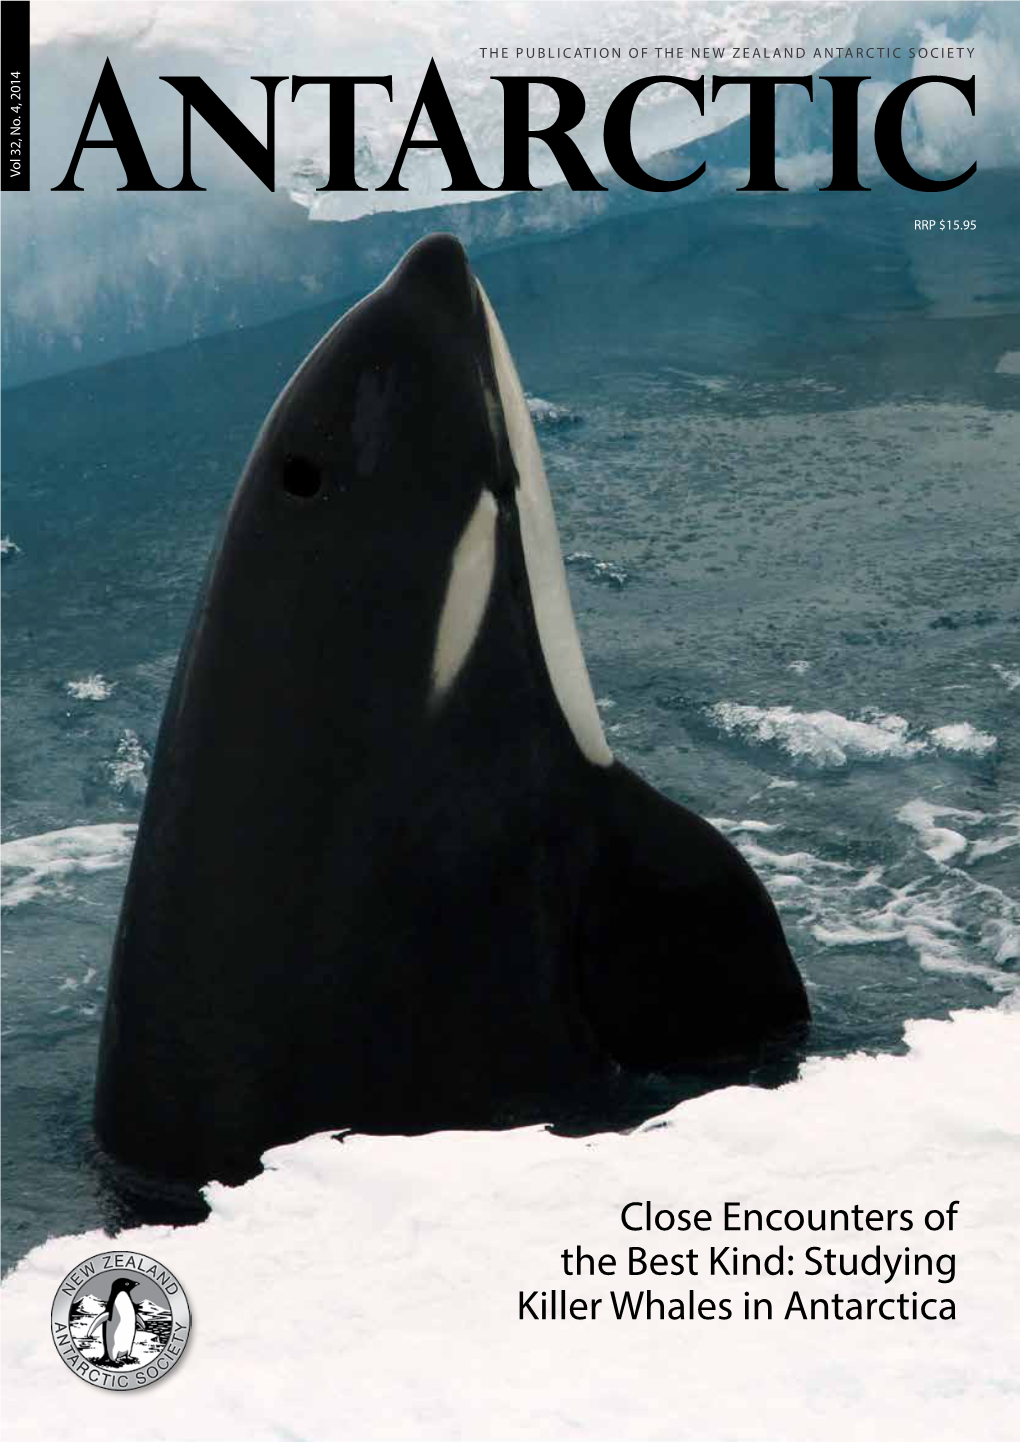 Close Encounters of the Best Kind: Studying Killer Whales in Antarctica Vol 32, No